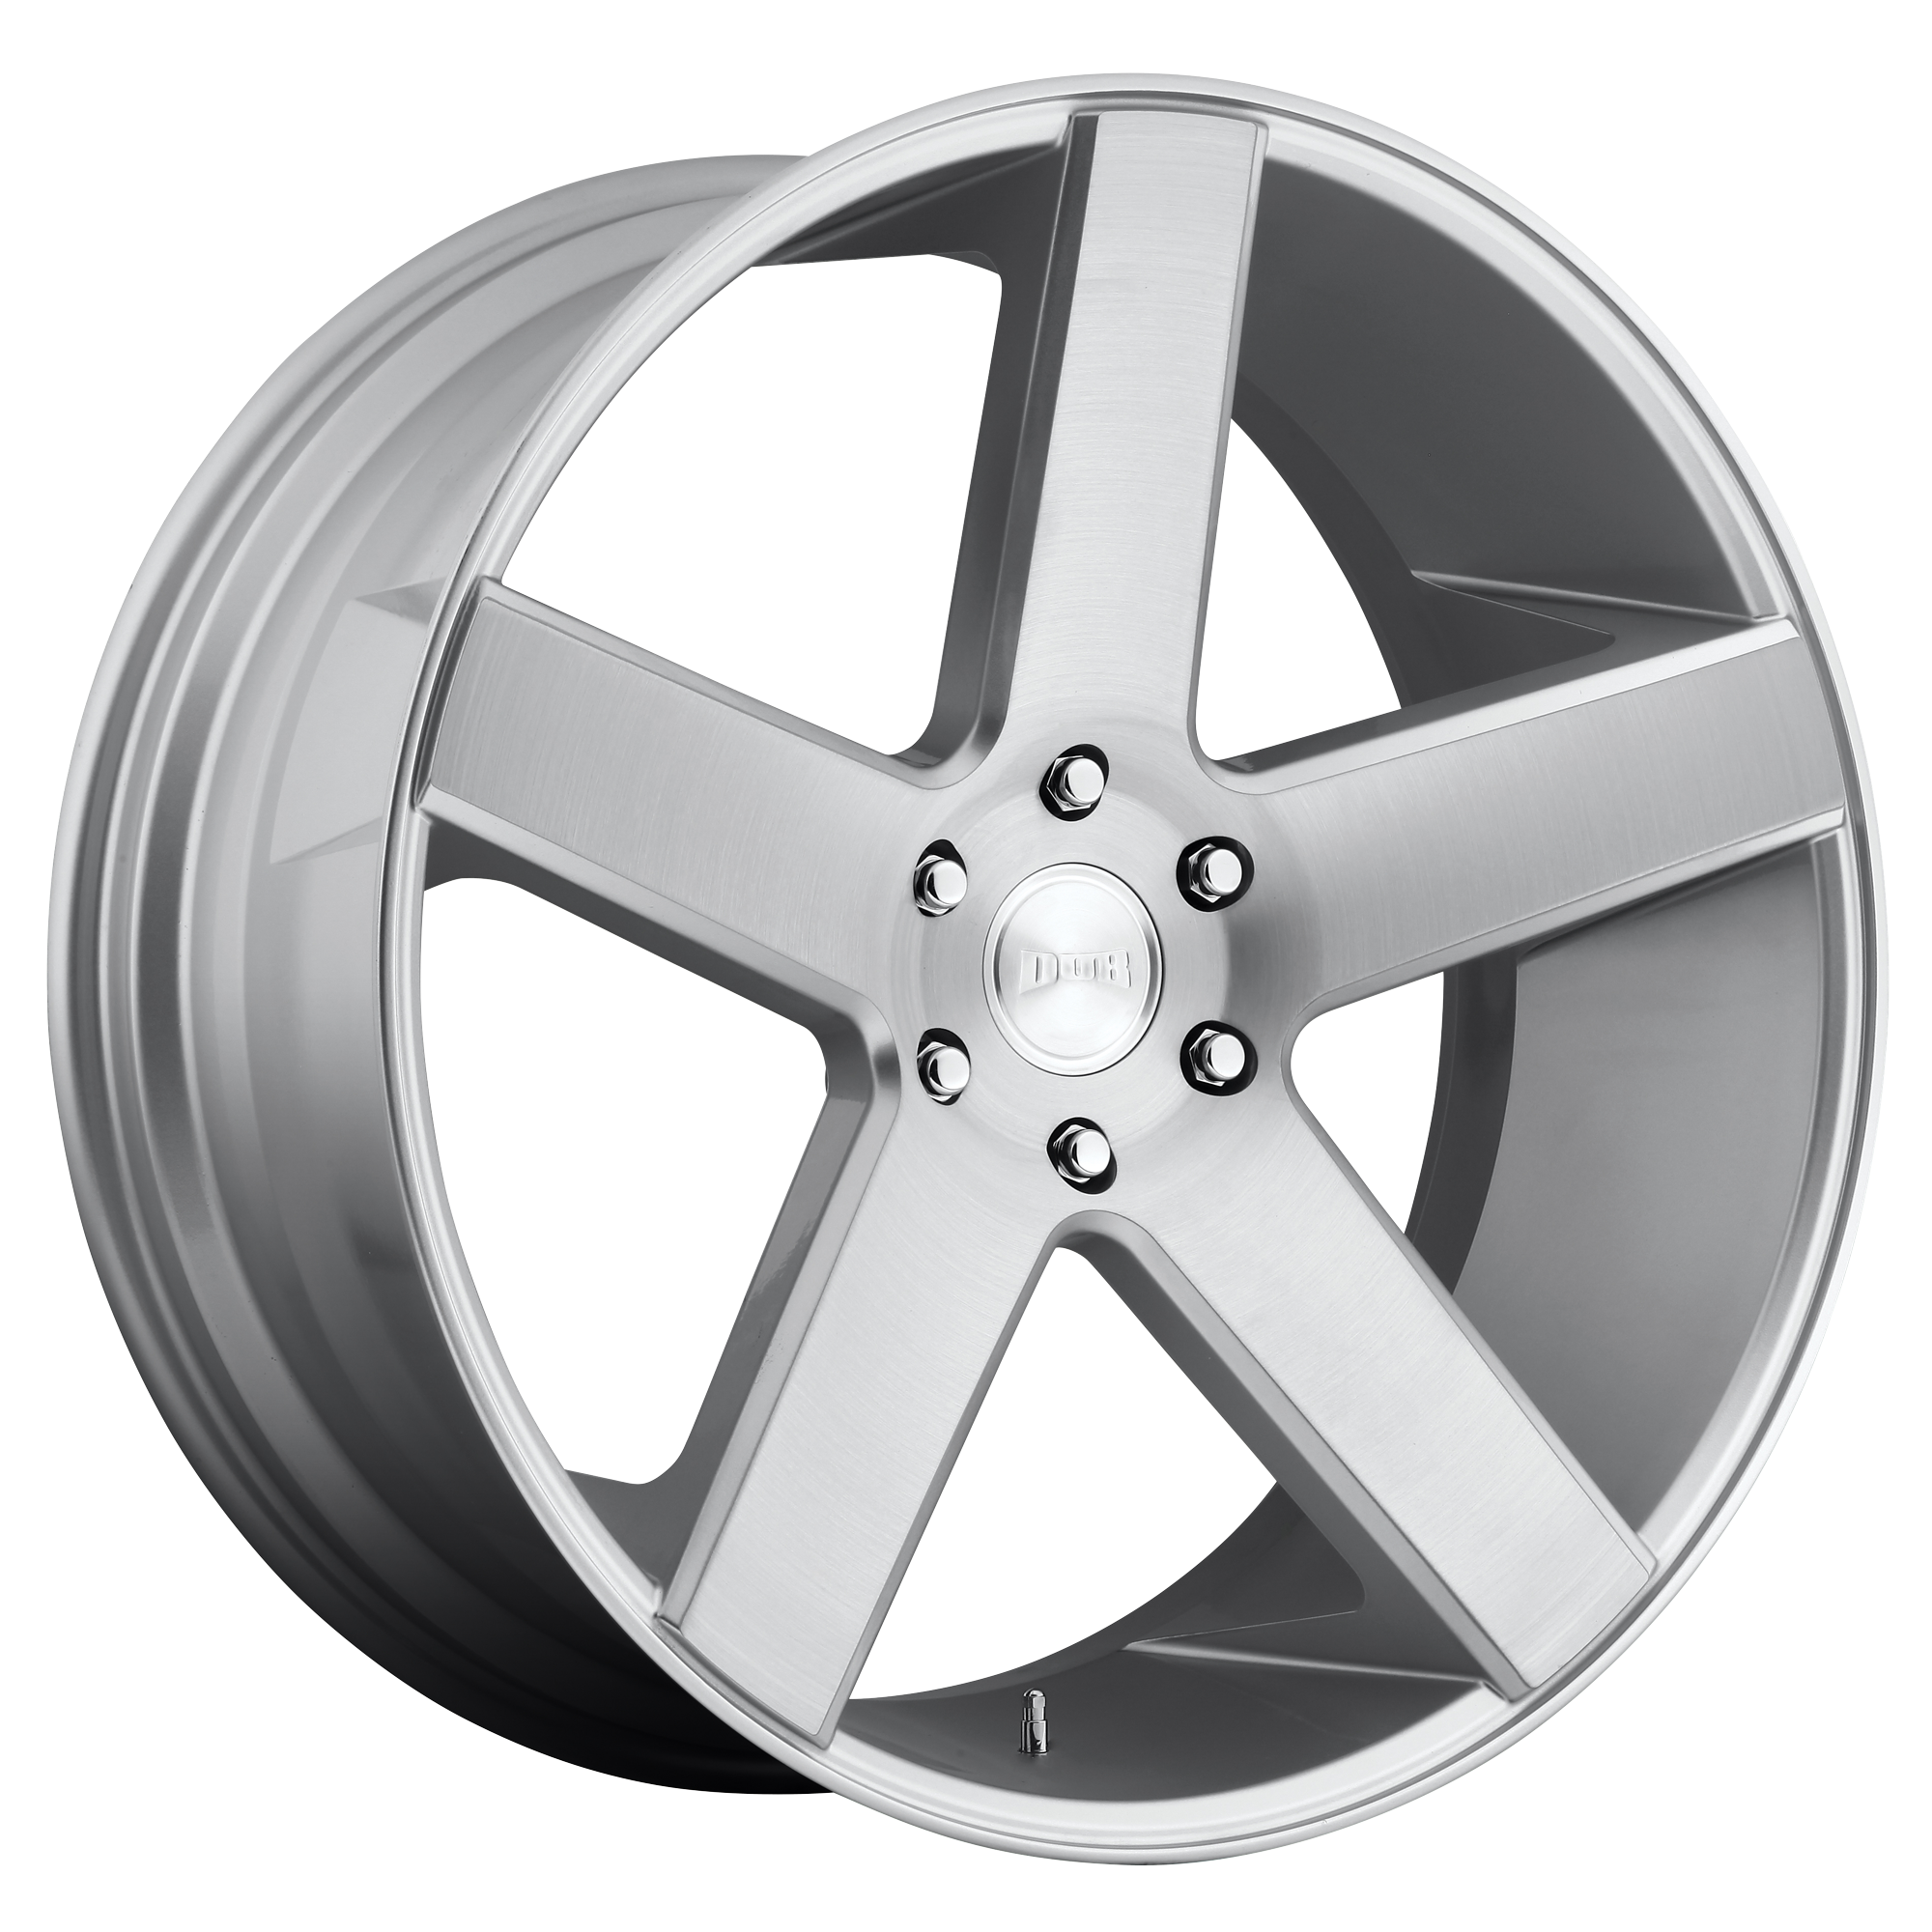 BALLER 22x9.5 6x135.00 GLOSS SILVER BRUSHED (30 mm) - Tires and Engine Performance